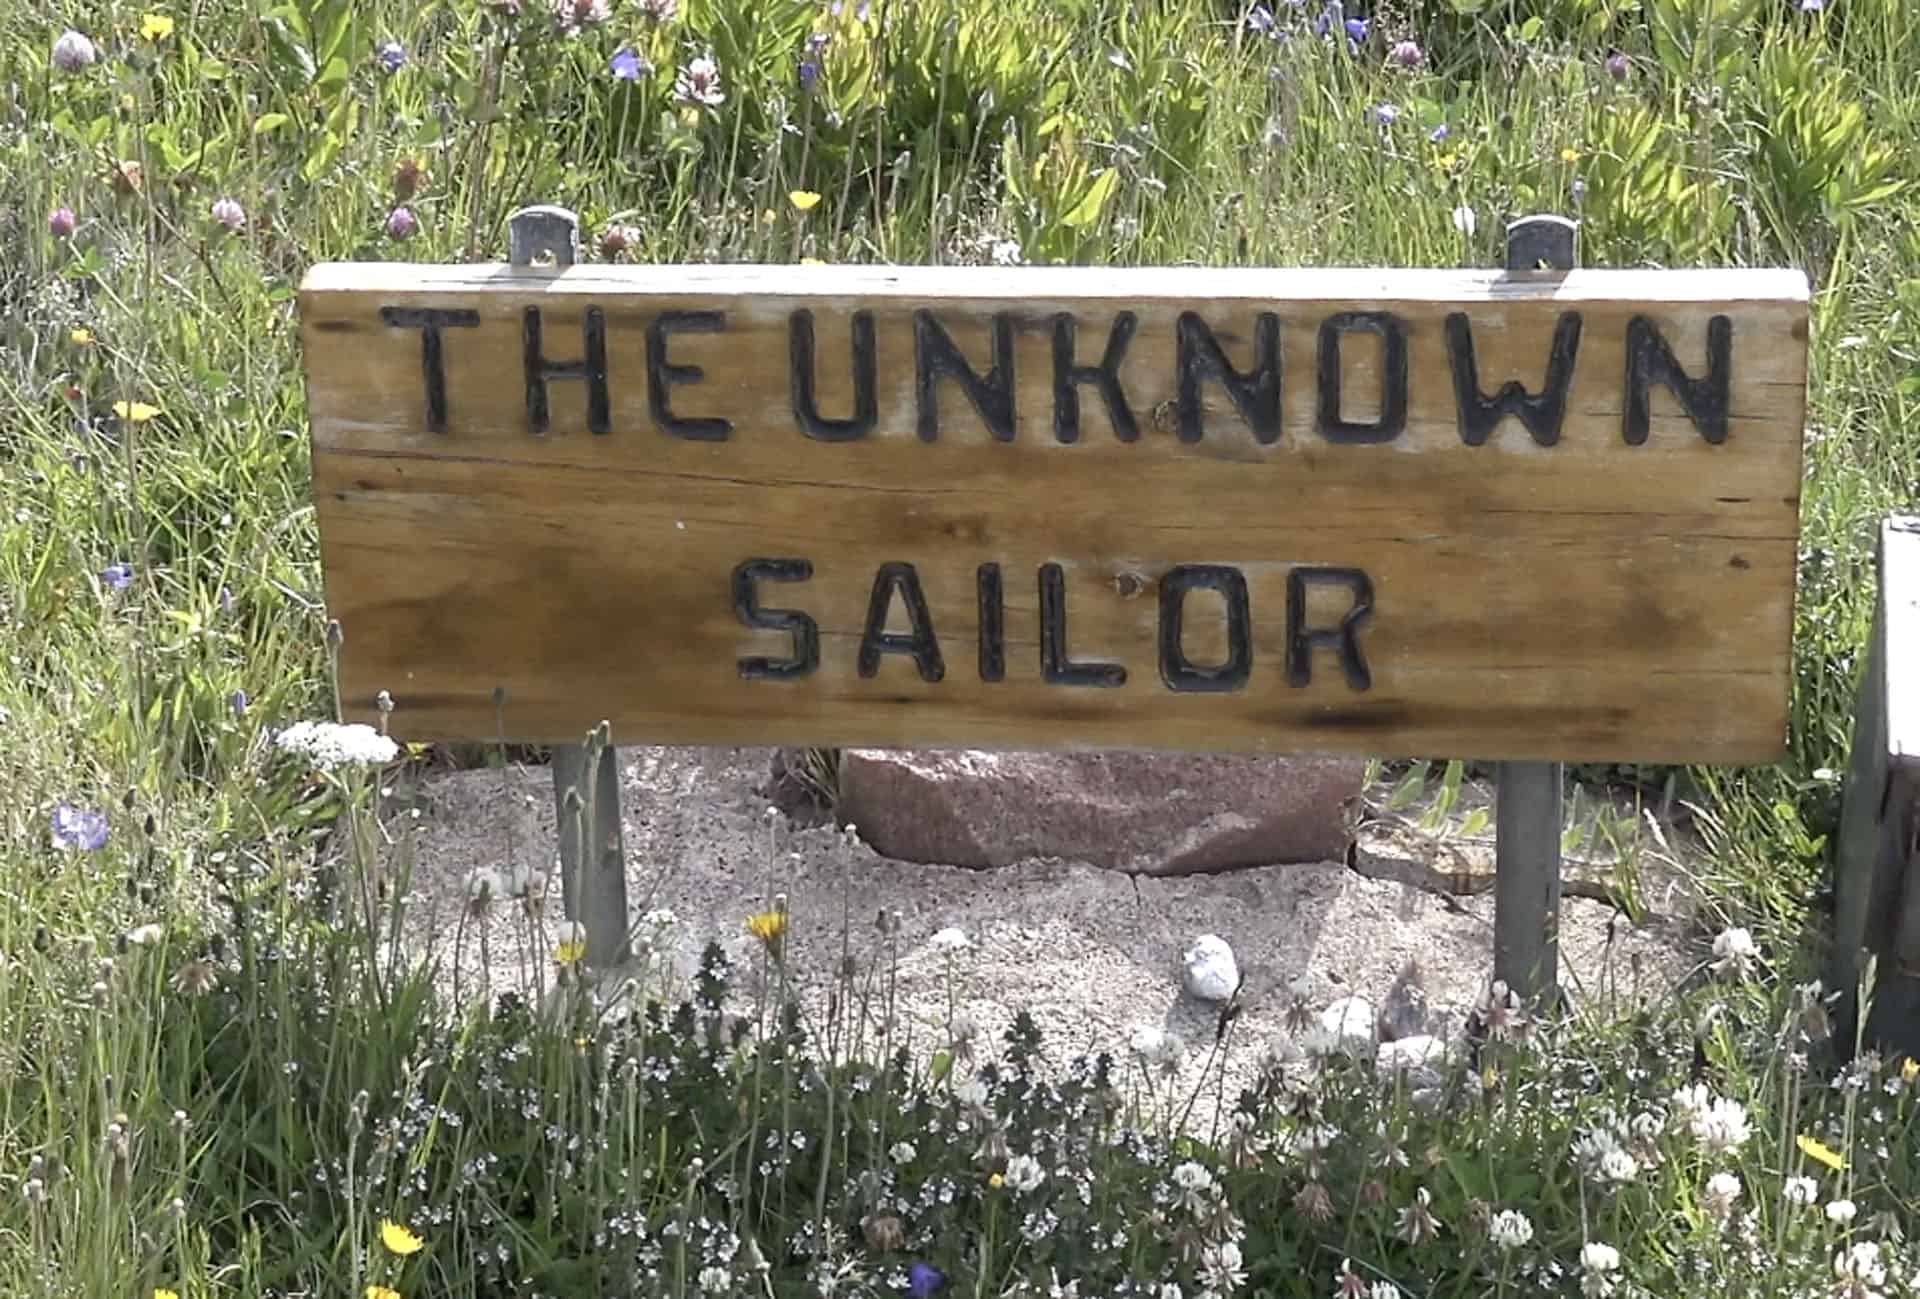 grave of the unkown sailor cabot trail